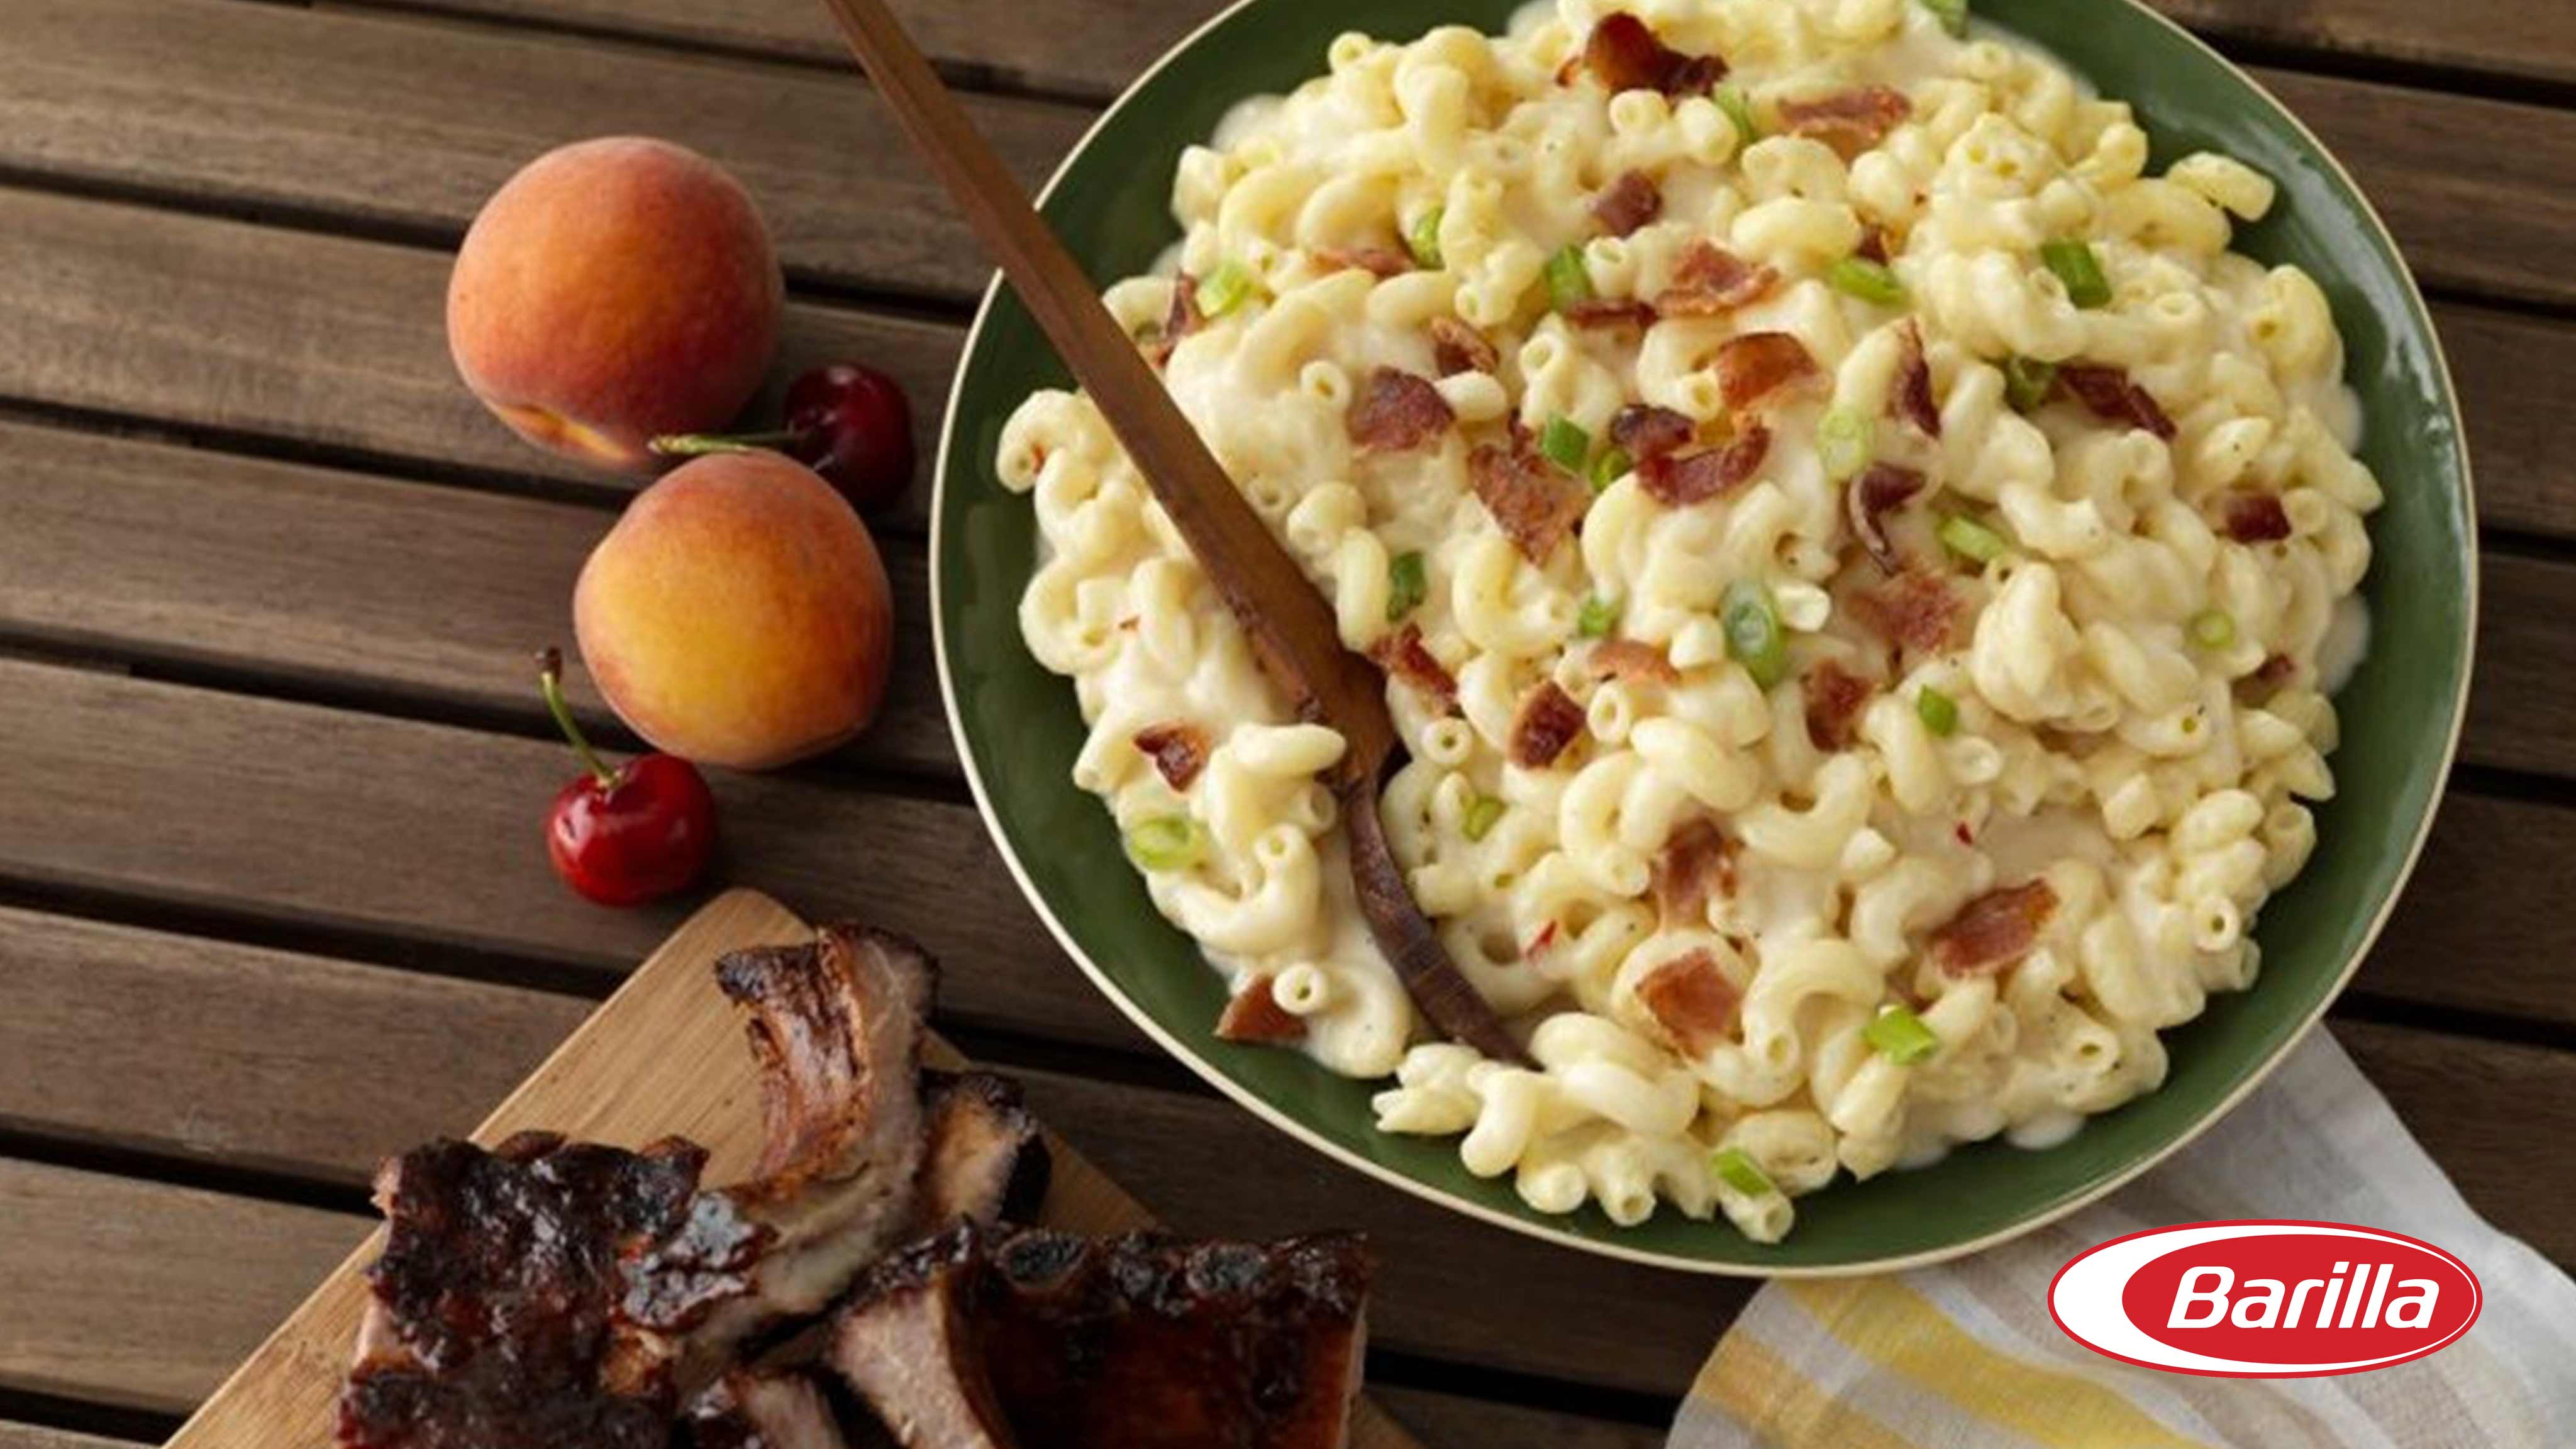 Image for Recipe Barilla® Backyard BBQ Gluten Free Mac and Cheese with Bacon